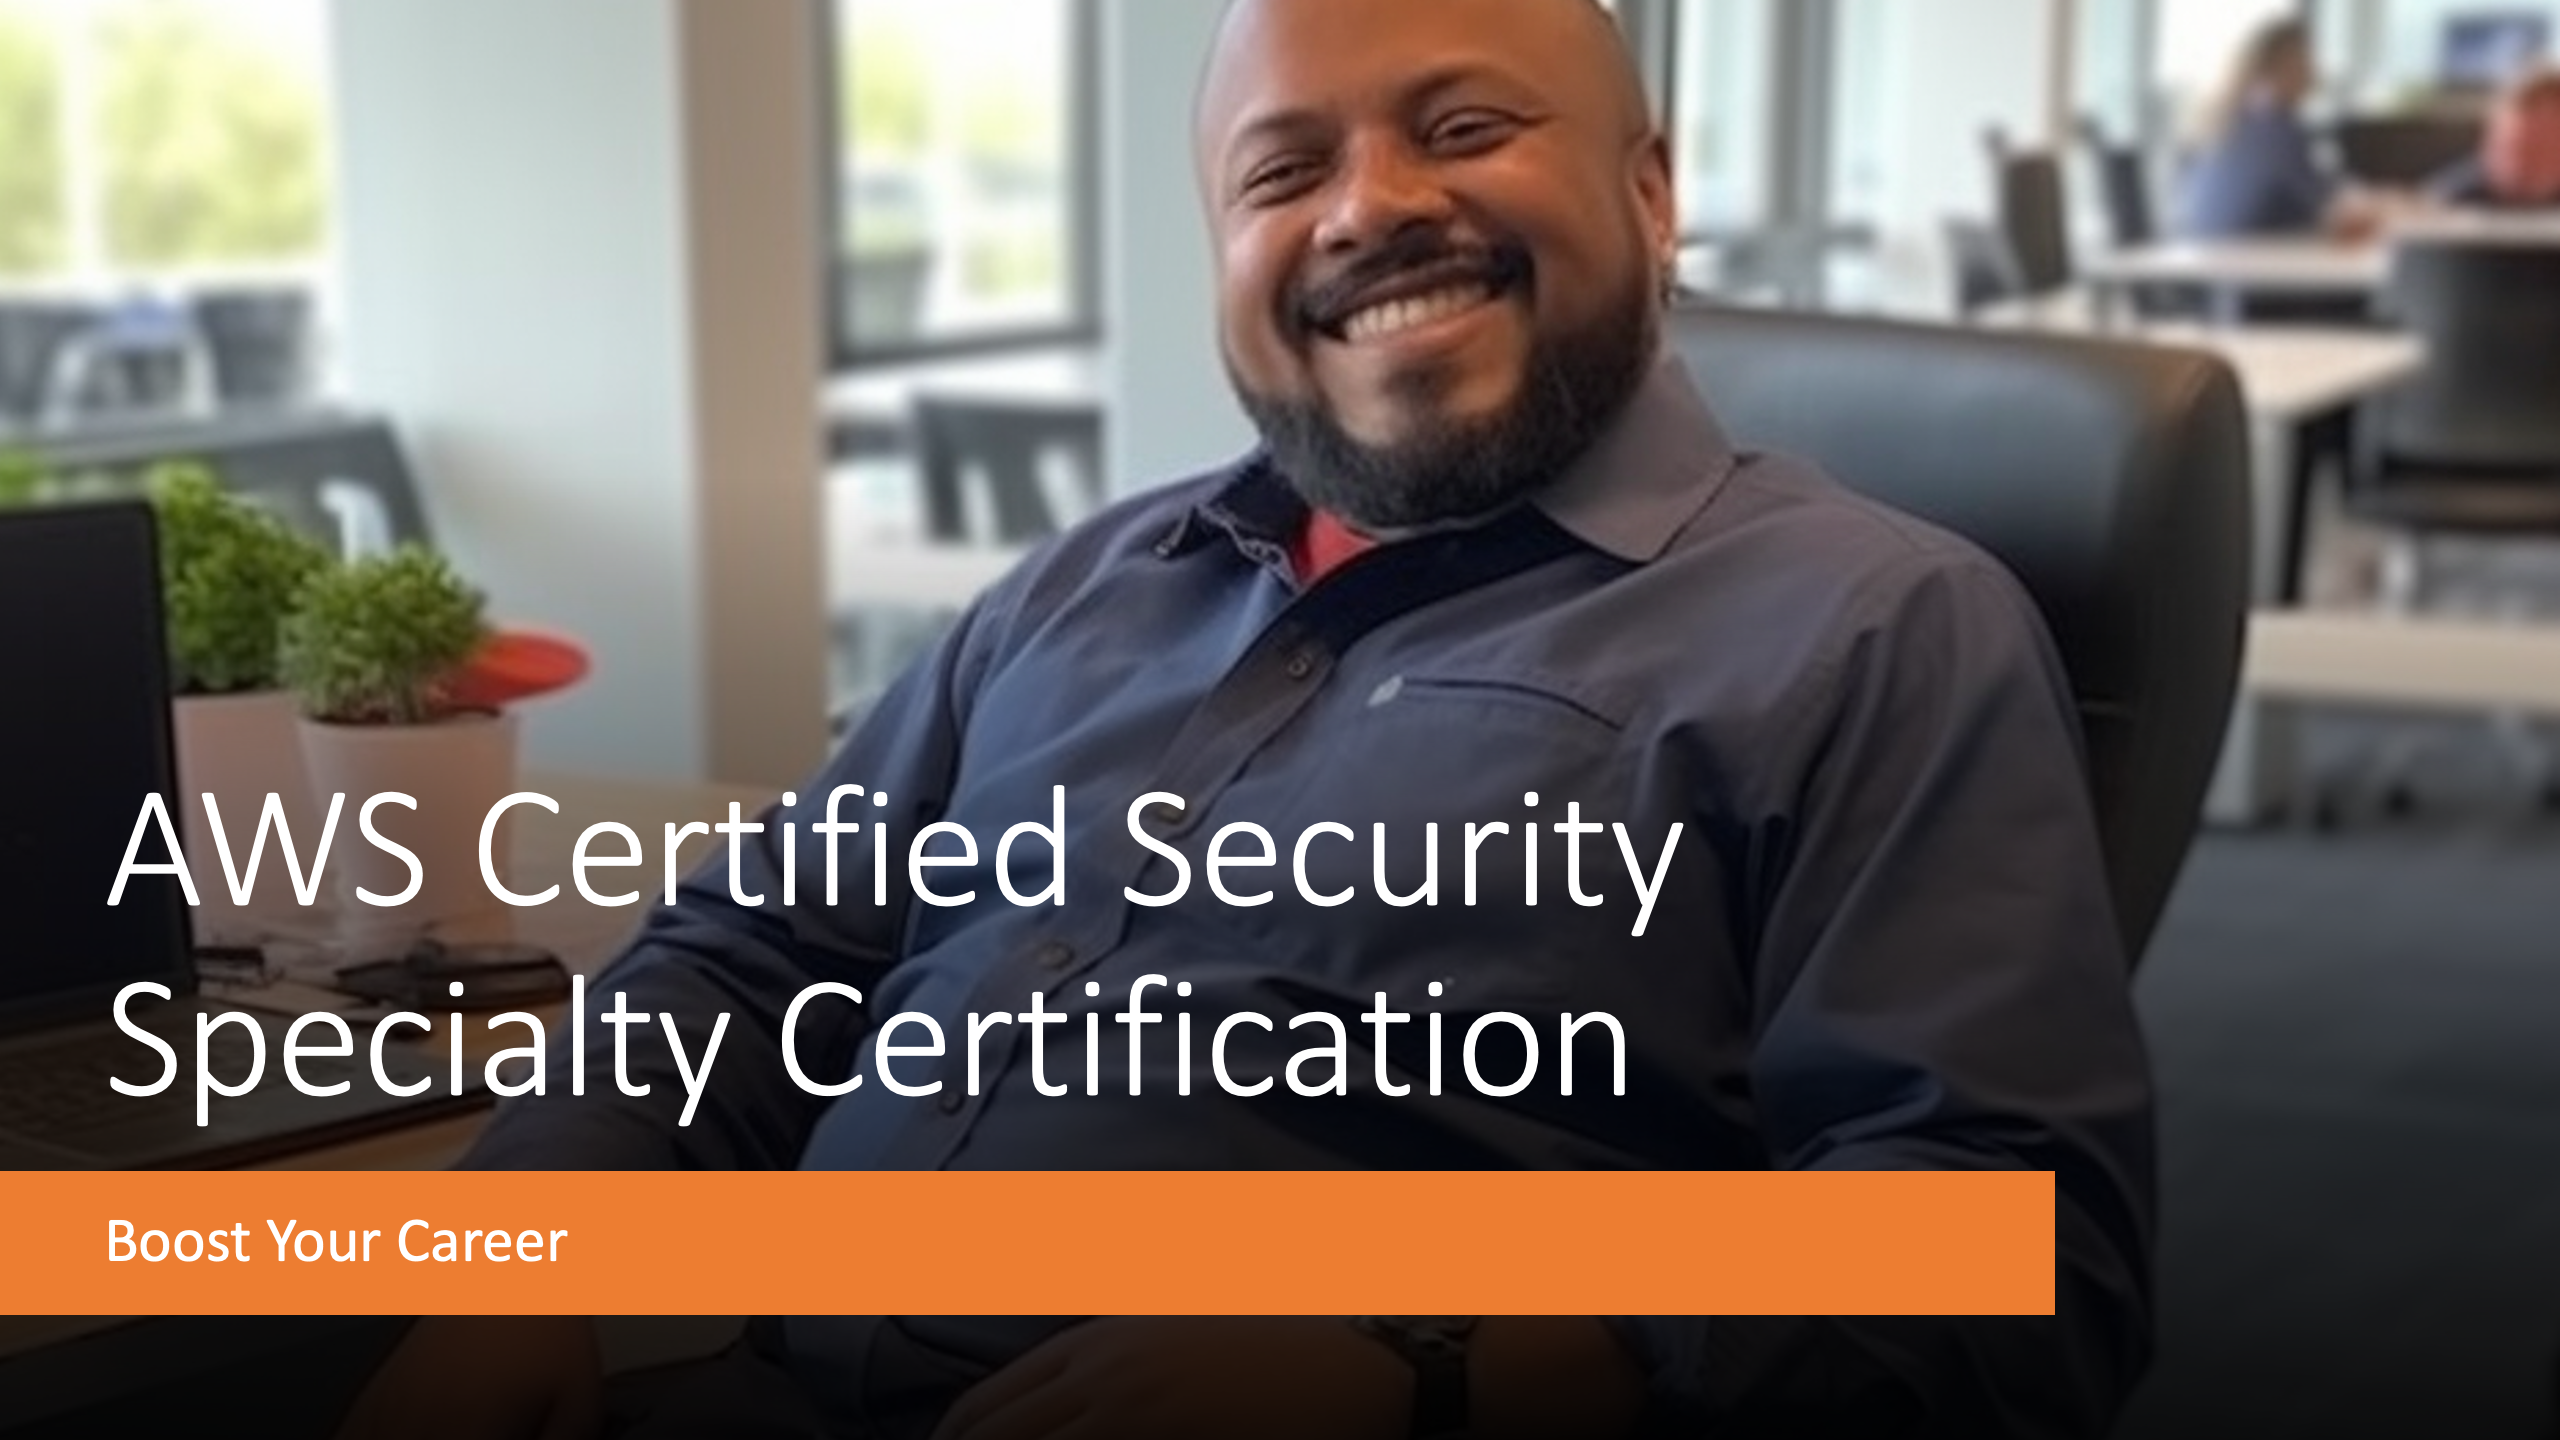 Boost Your Career with AWS Certified Security Specialty Certification